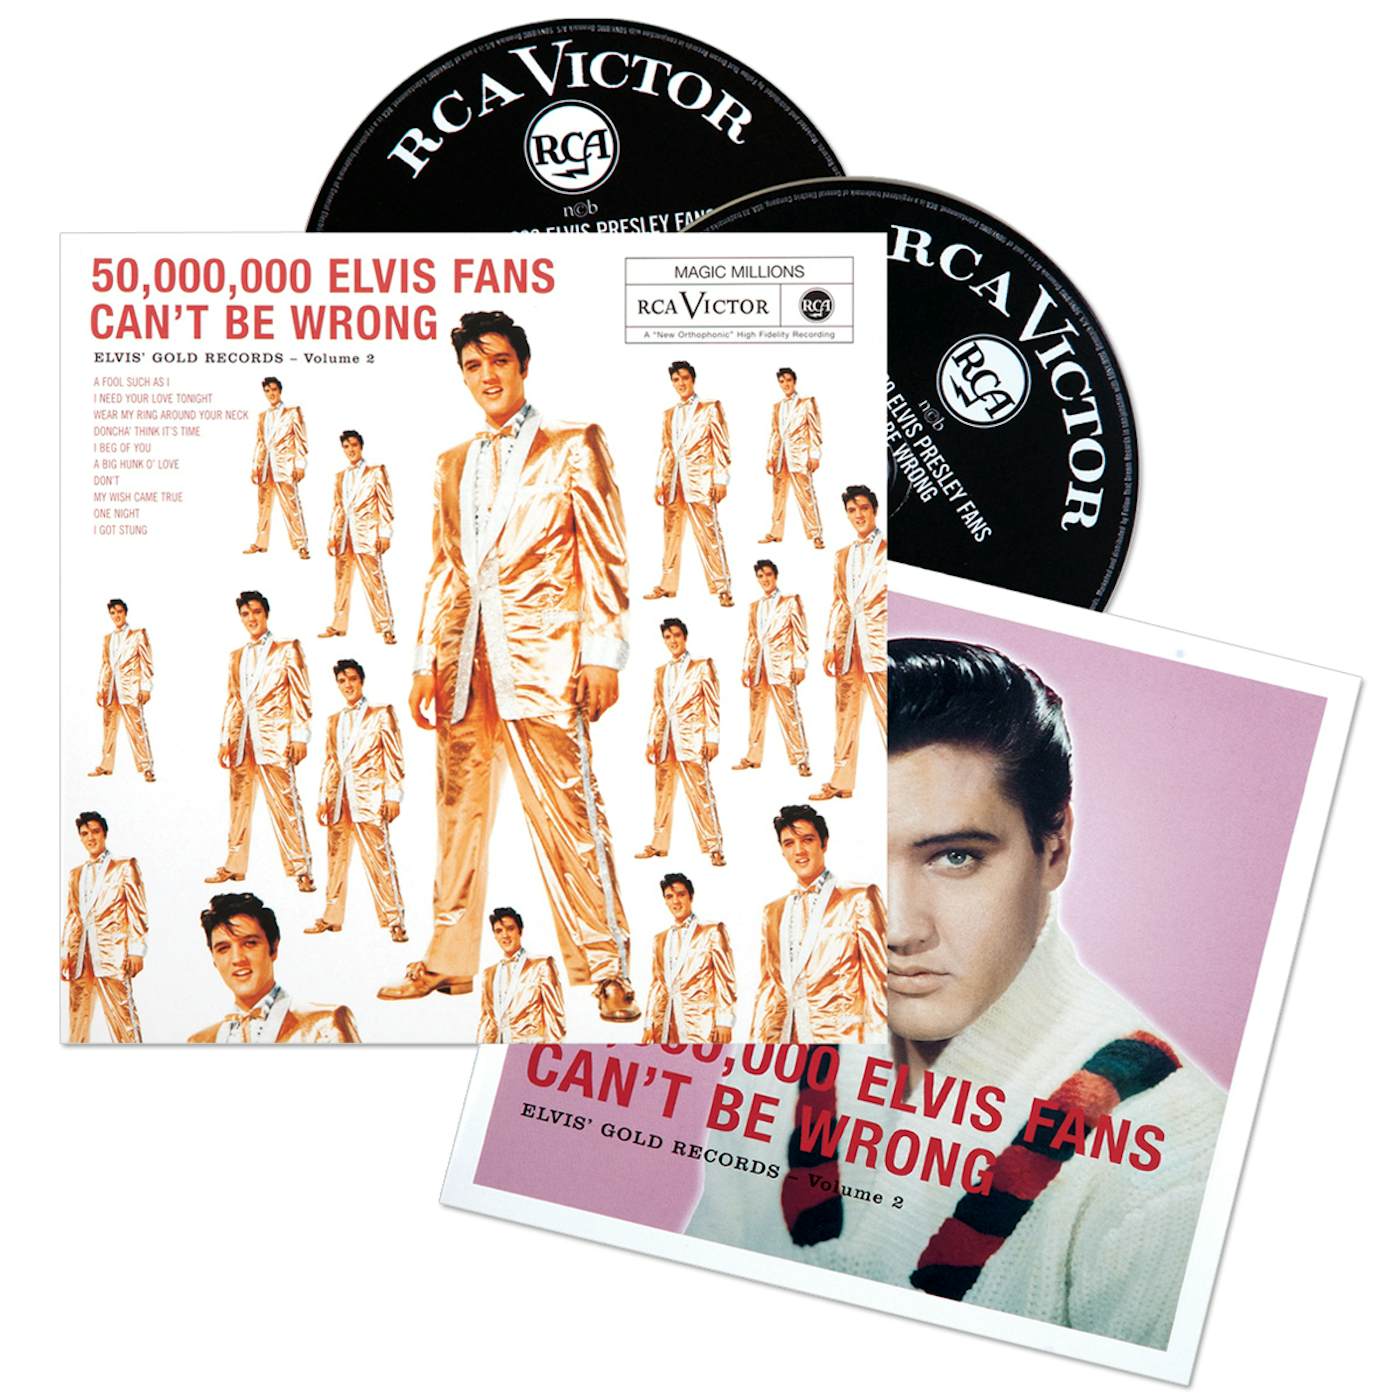 50 Million Elvis Fans Can't Be Wrong FTD CD